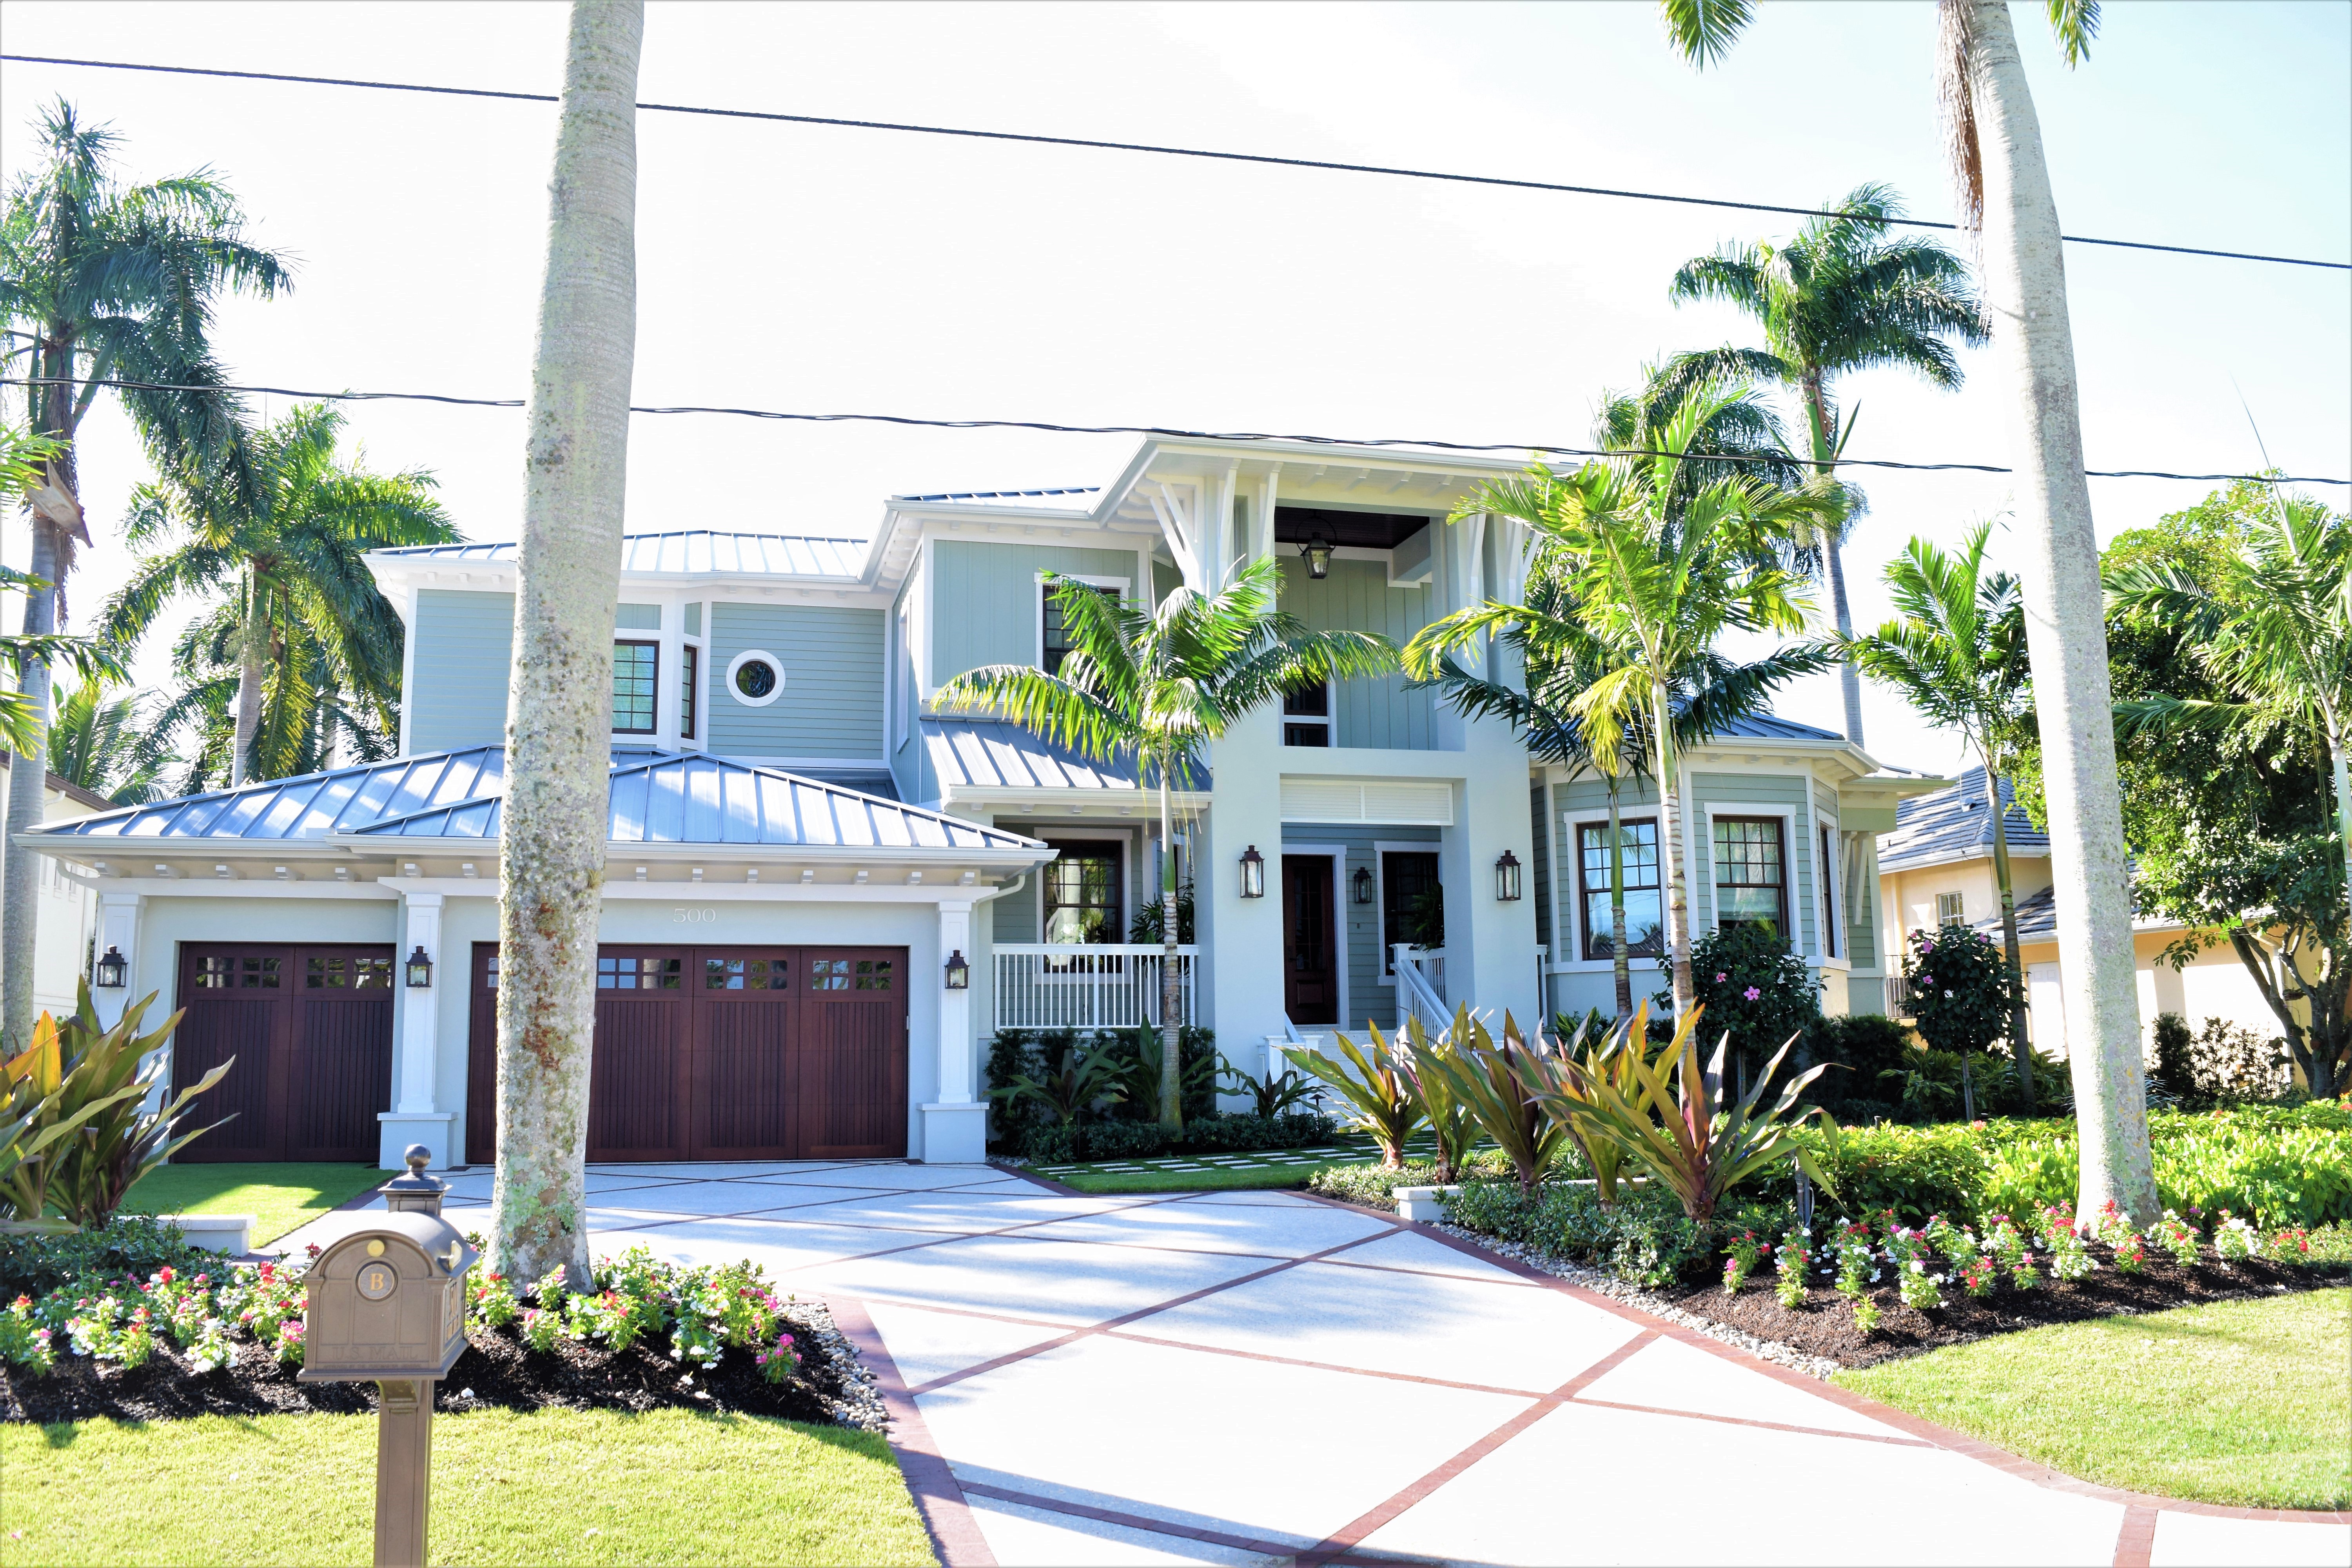 Residential Property Management in and near SWFL